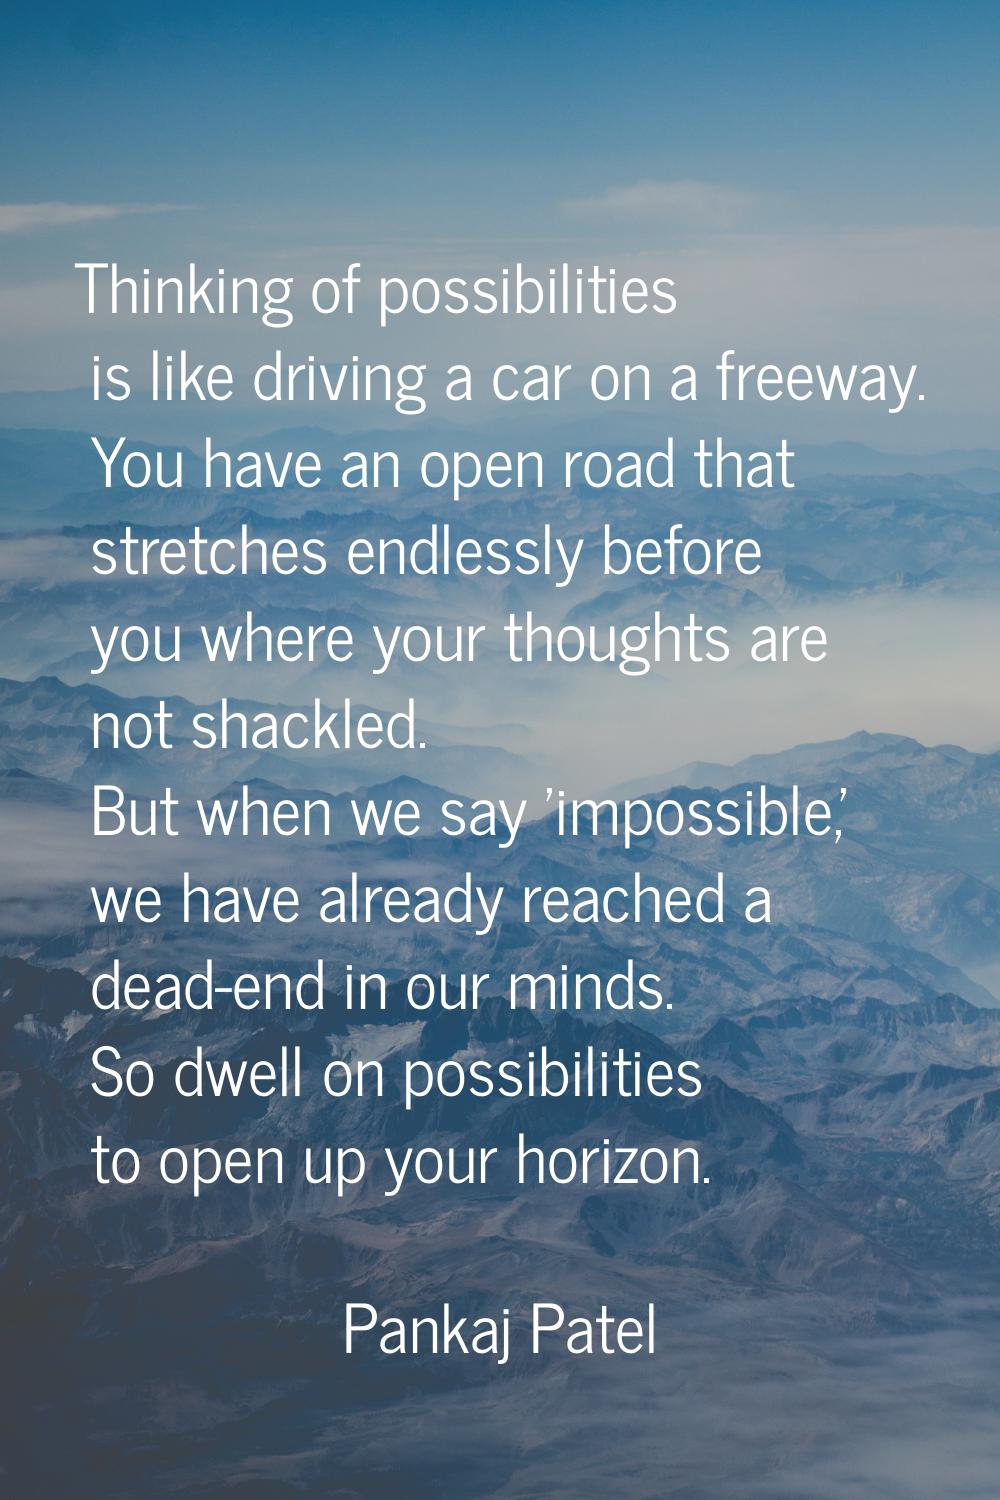 Thinking of possibilities is like driving a car on a freeway. You have an open road that stretches 